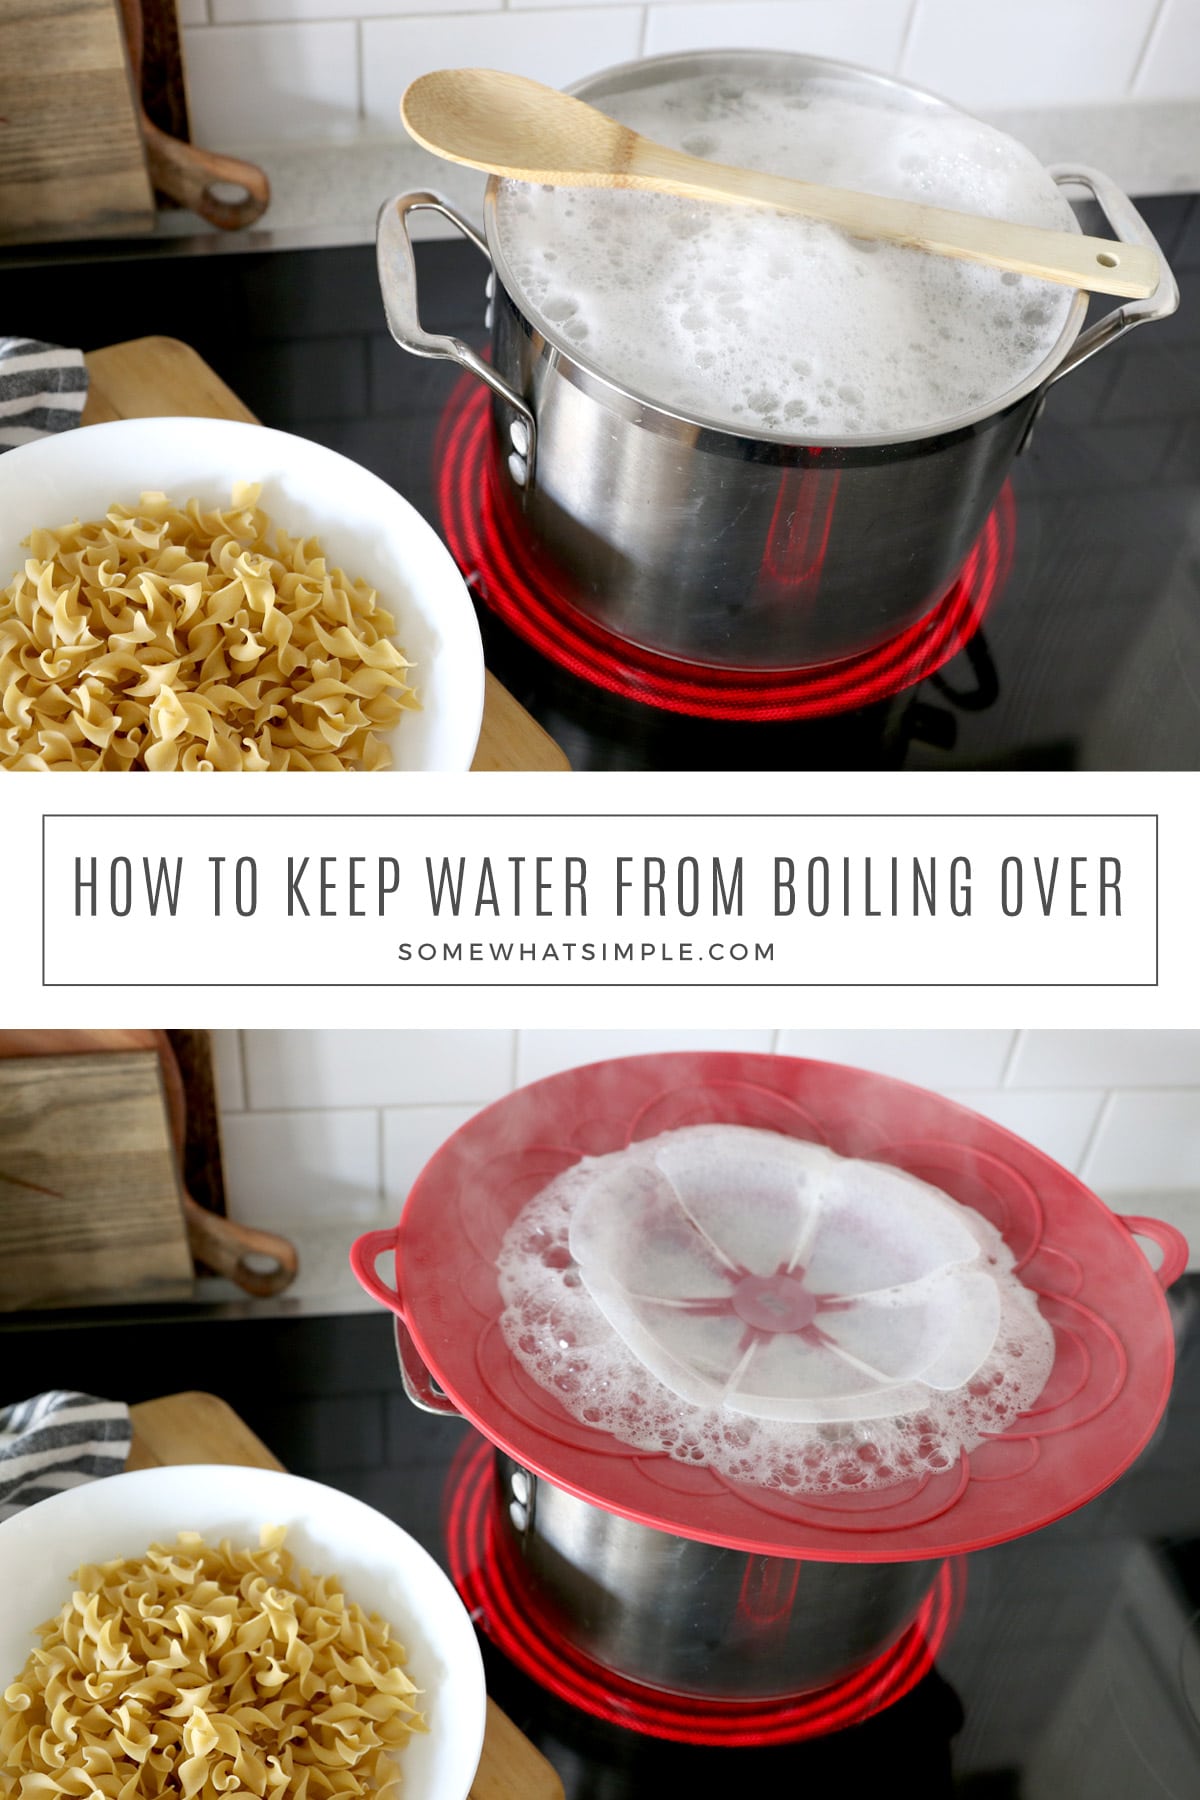 How does water boil in a pot without a lid?